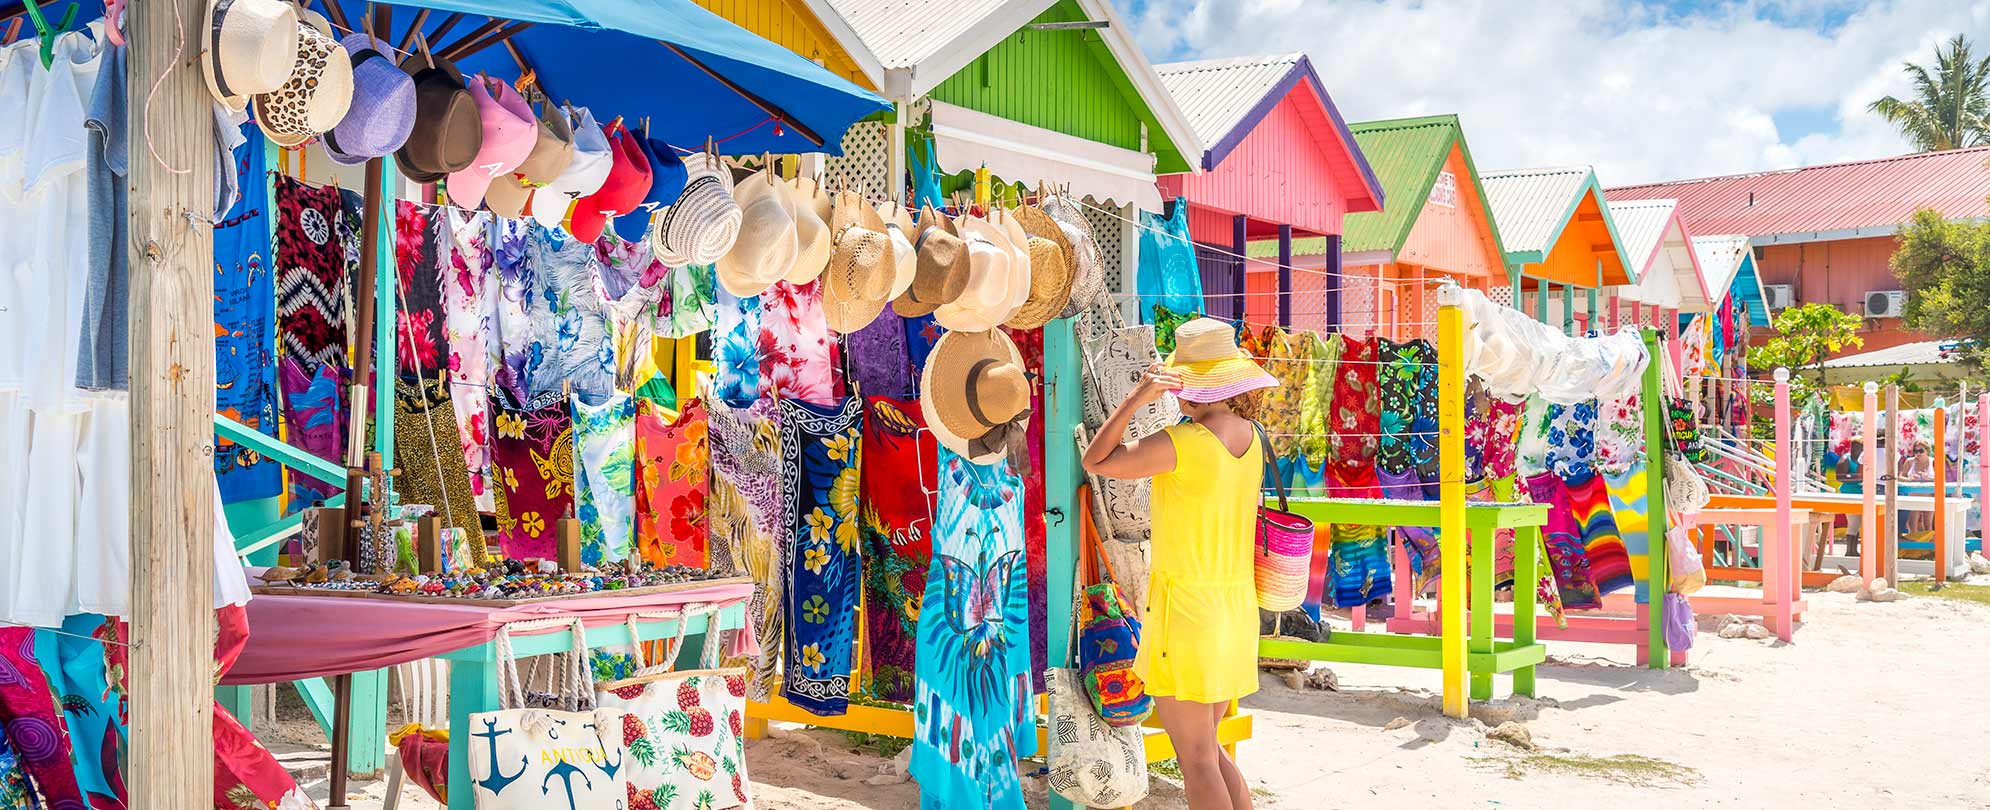 A woman in a yellow dress tries on hats and shops at a colorful outdoor market in Puerto Rico.